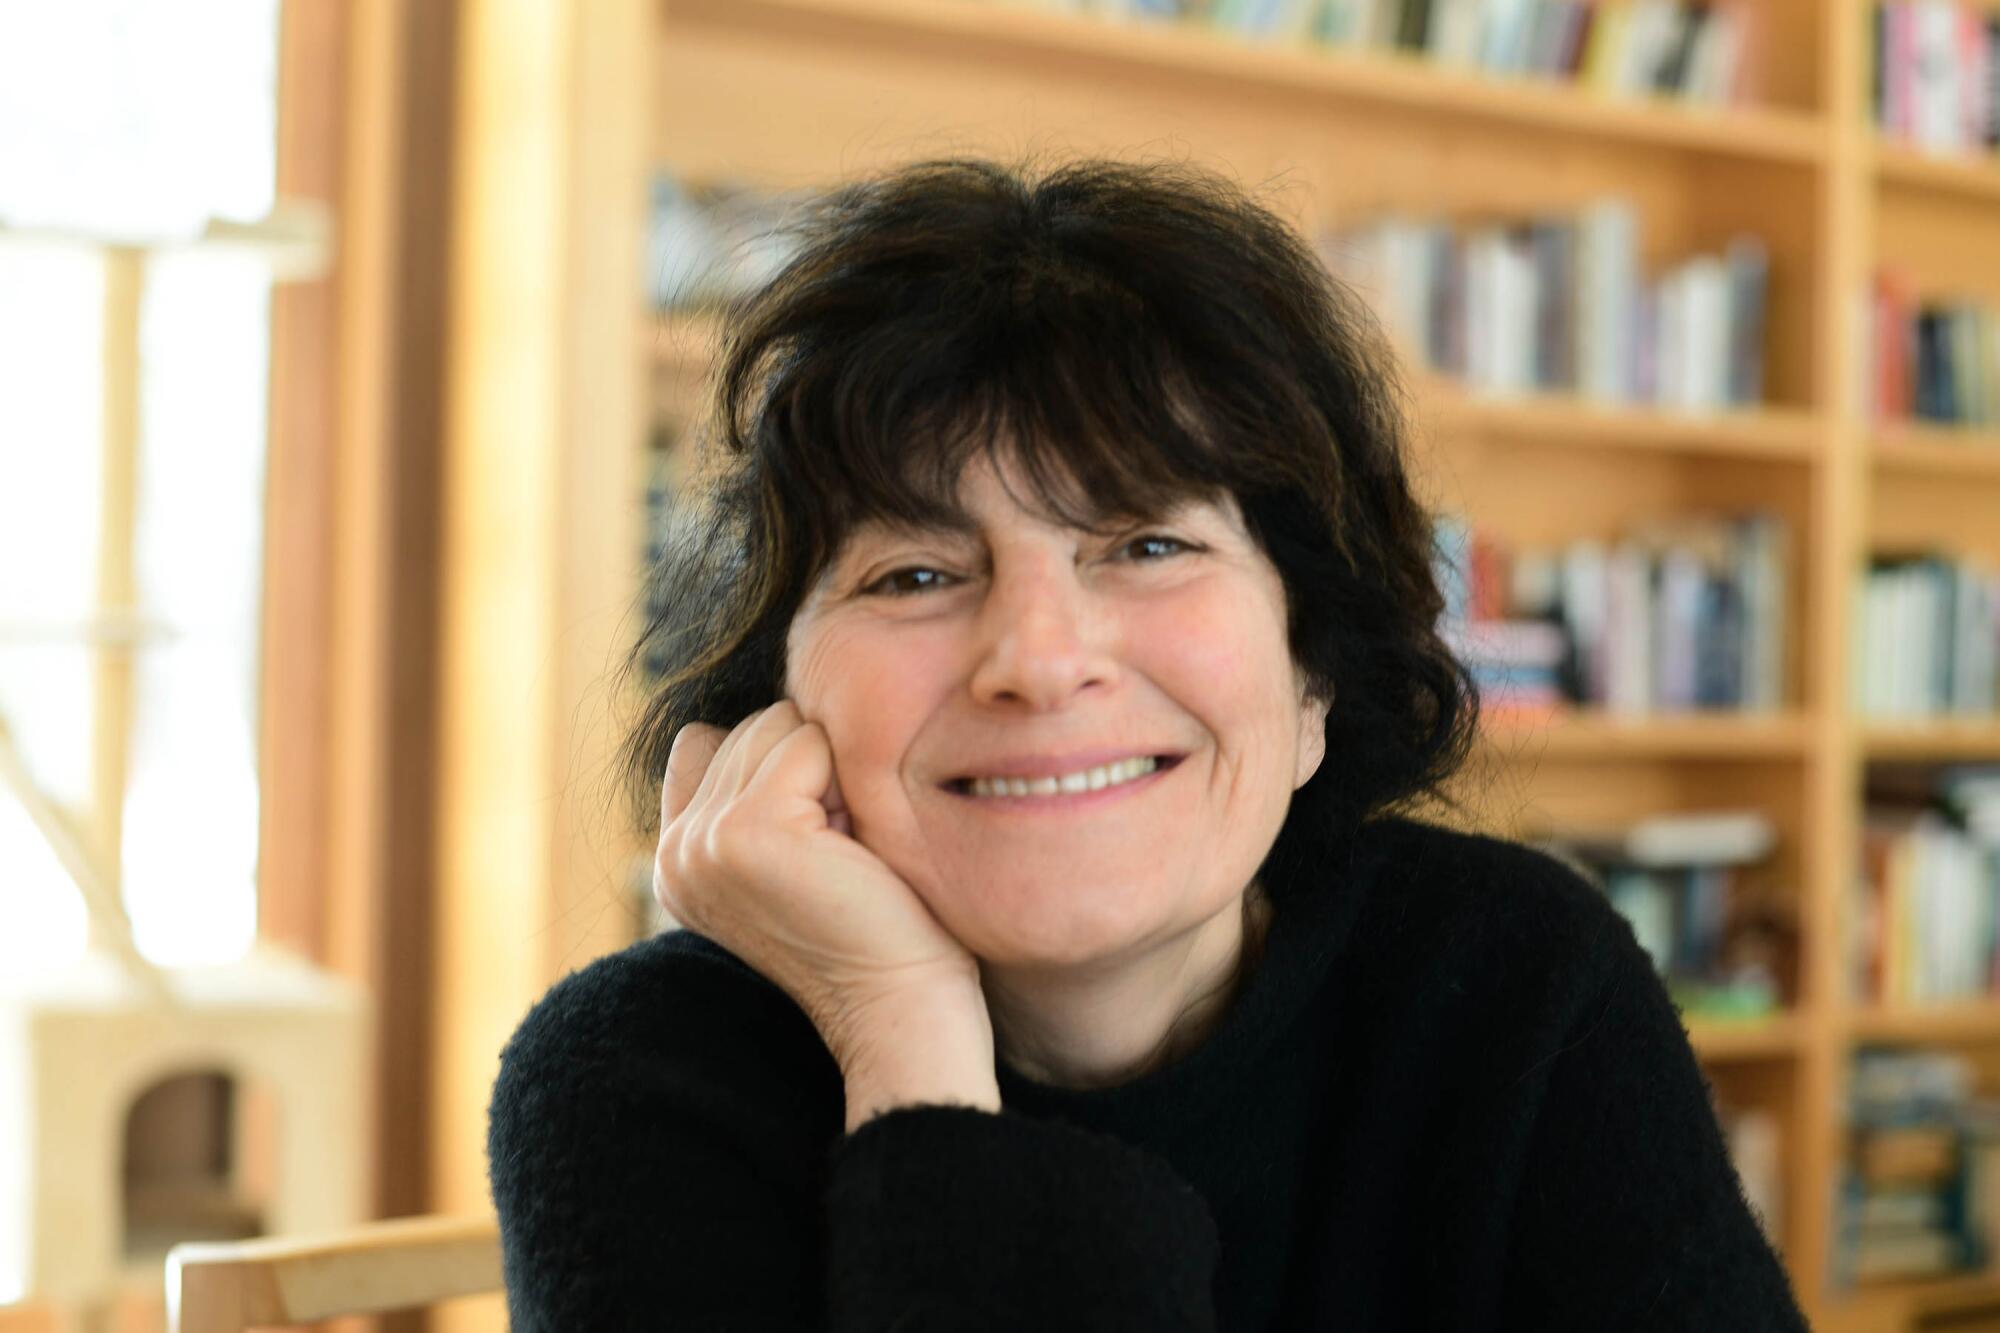 Food author Ruth Reichl for the book SAVE ME THE PLUMS